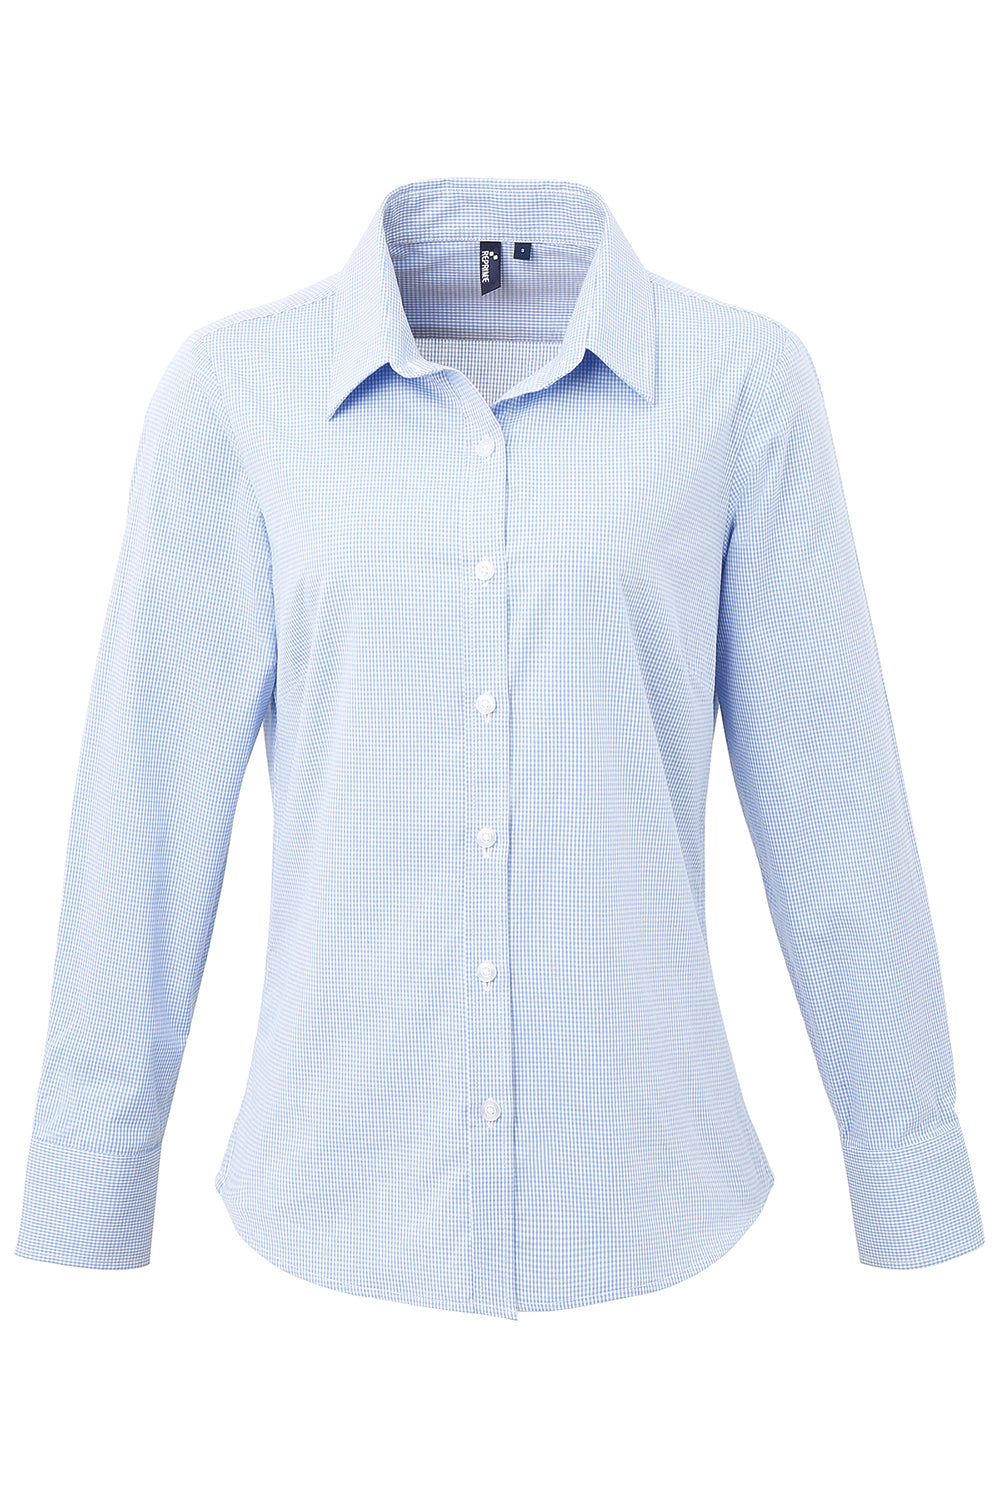 Artisan Collection RP320 Womens Microcheck Gingham Long Sleeve Button Down Shirt Light Blue/White Model Flat Front